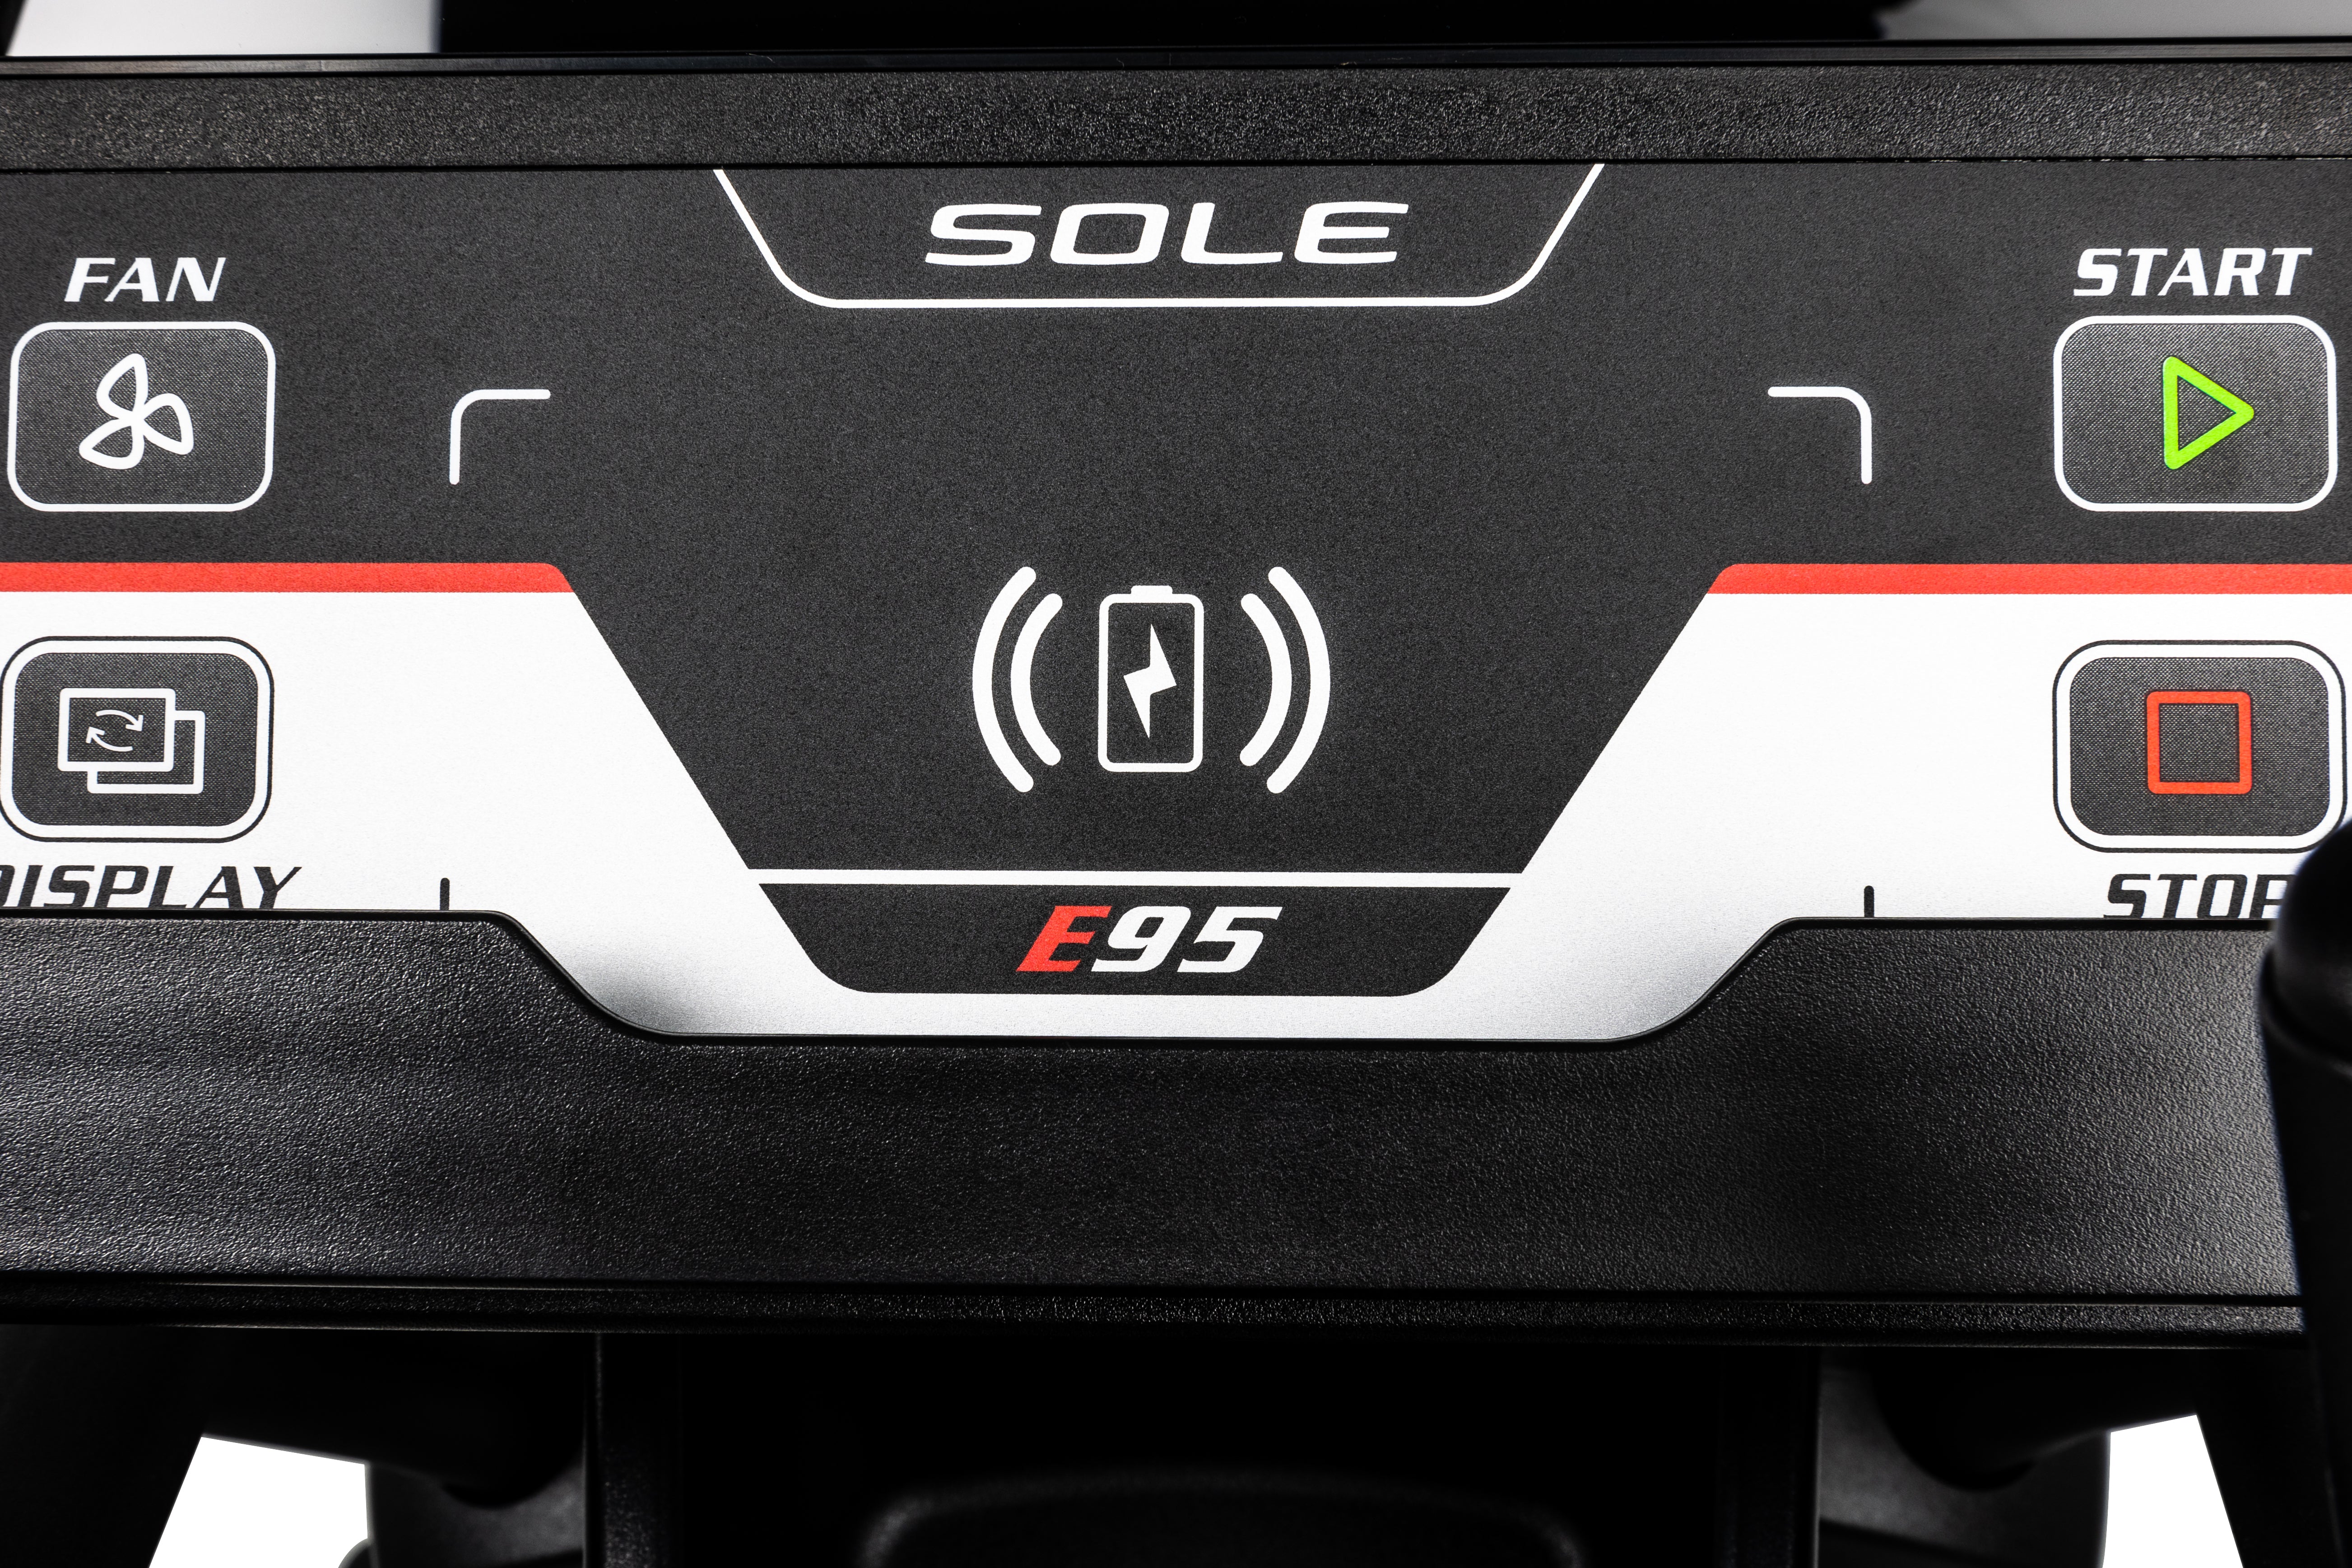 Zoomed-in view of the Sole E95 elliptical machine's control panel, displaying buttons labeled 'FAN', 'DISPLAY', and 'START', along with the 'E95' branding and a battery icon.